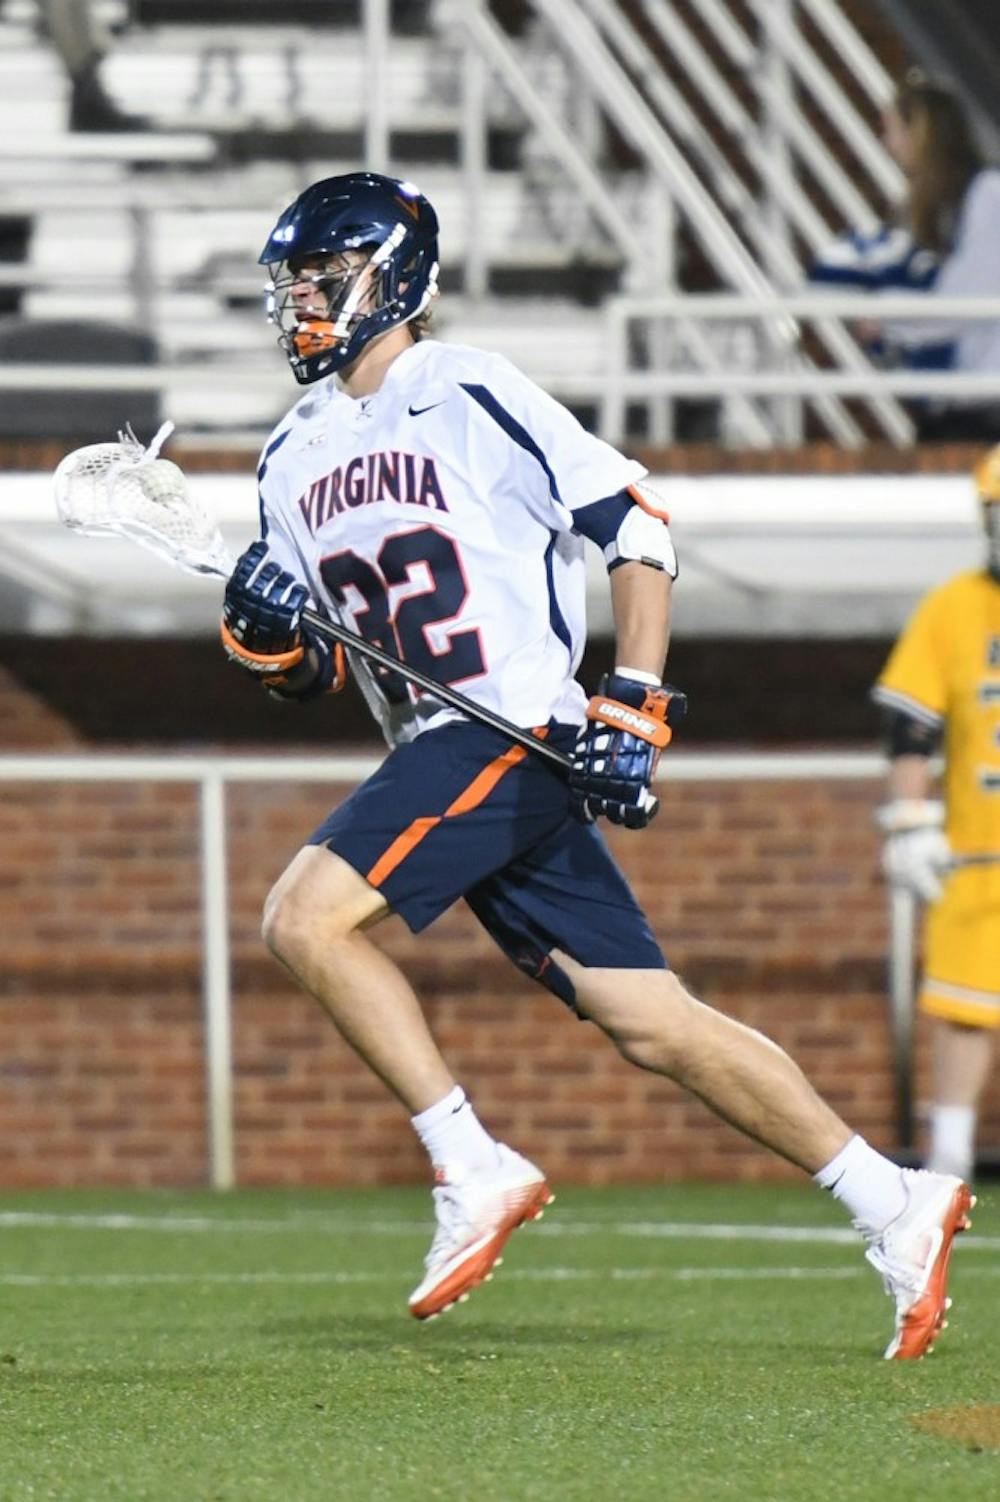 <p>Freshman midfielder Dox Aitken earned four points off two goals and two assists in last weekend's close loss to Johns Hopkins.&nbsp;</p>